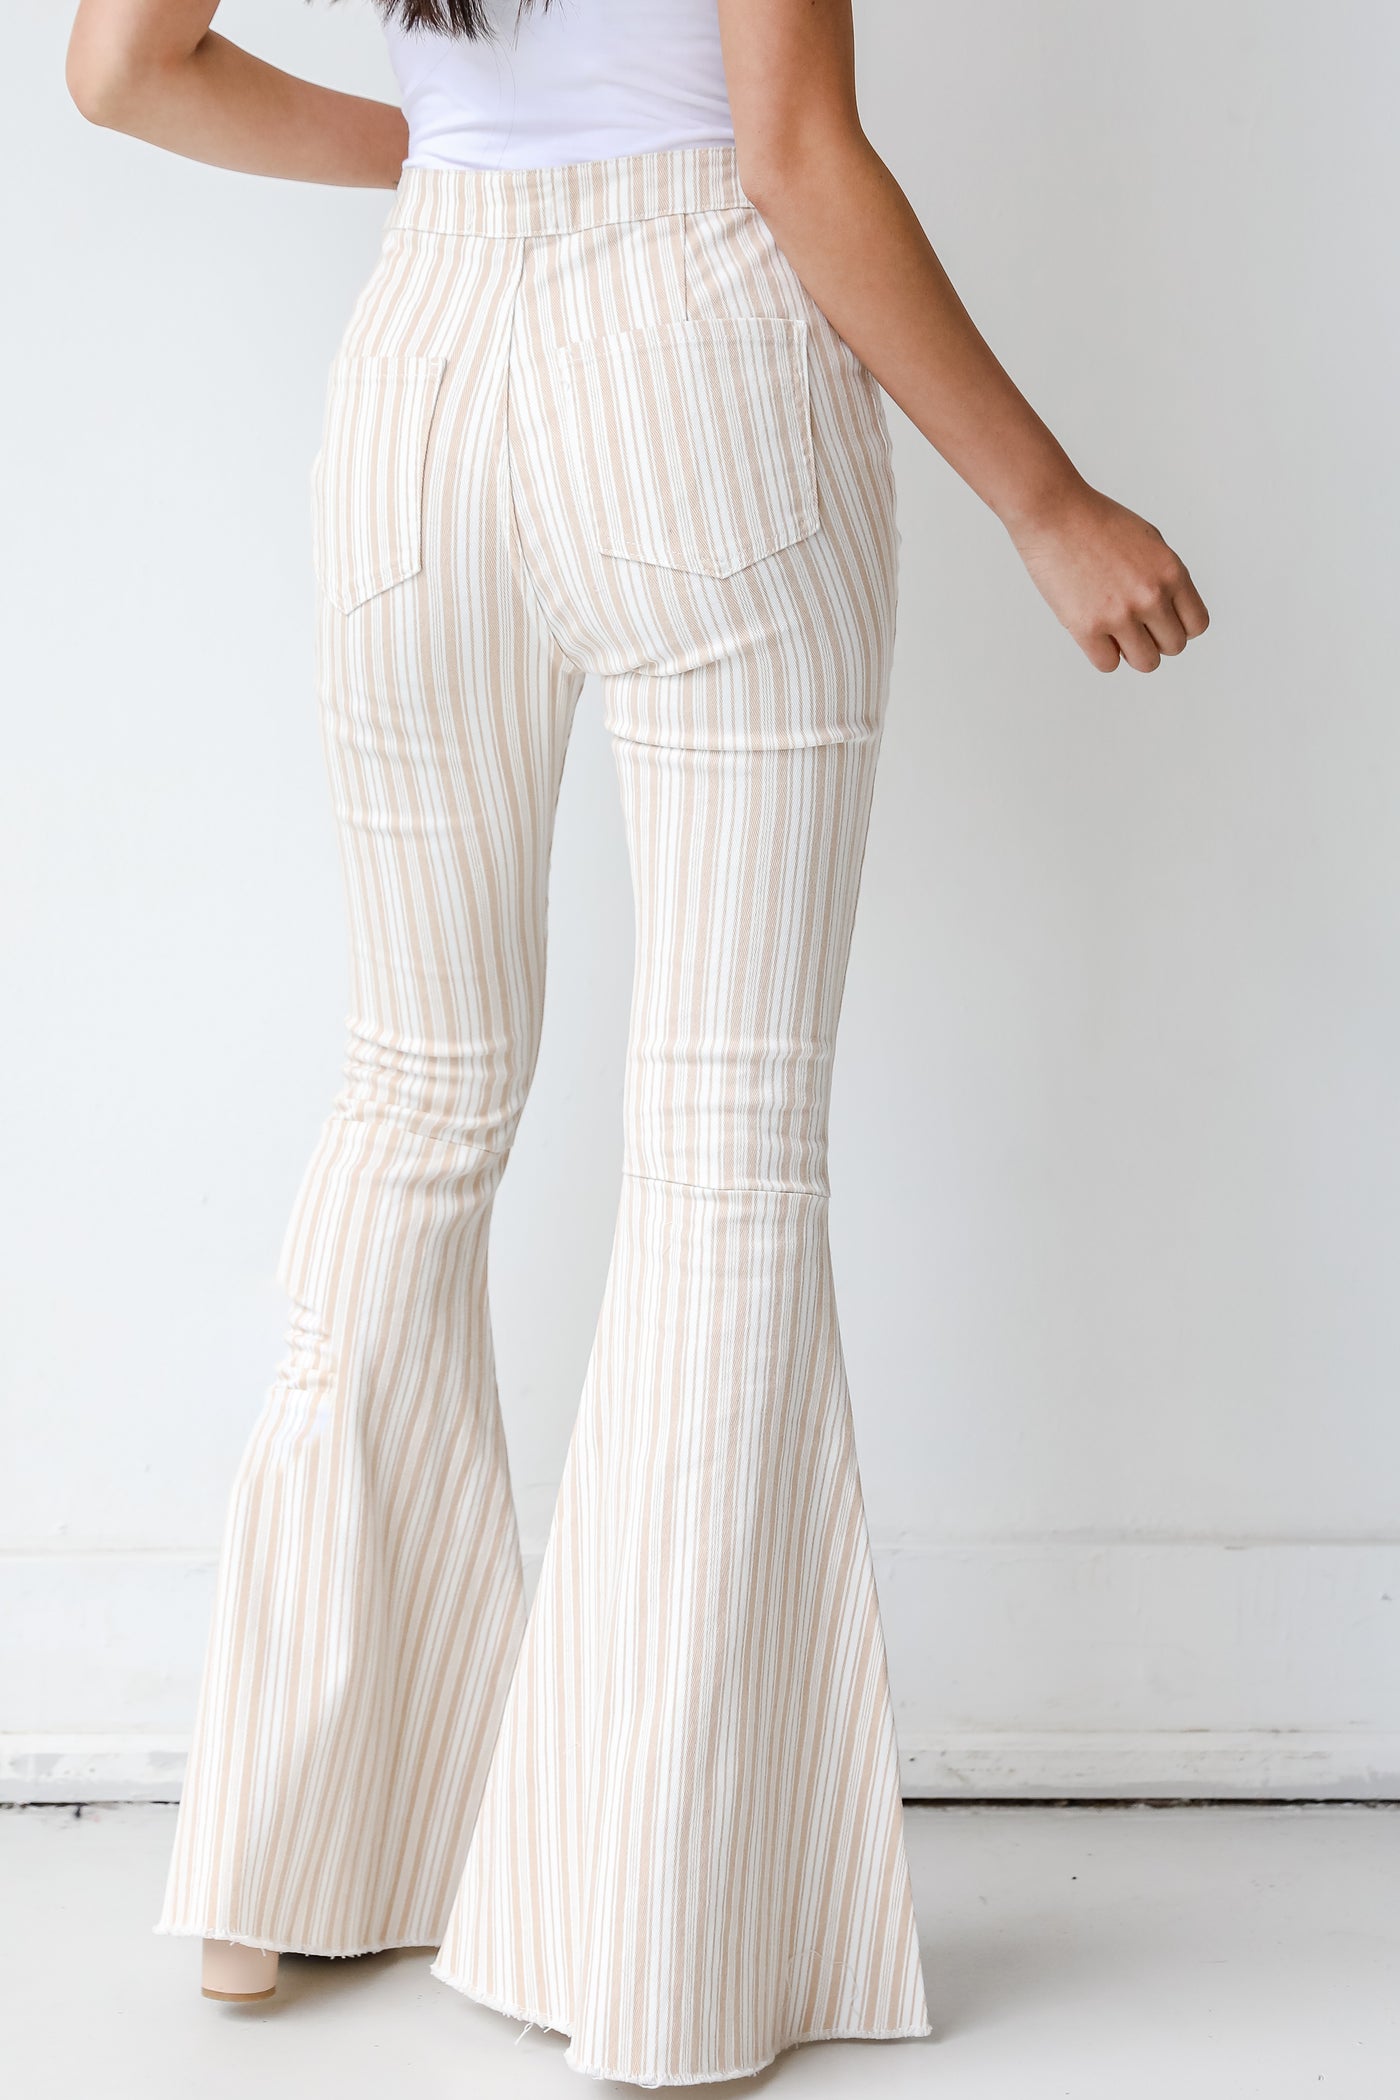 Striped Flare Jeans back view